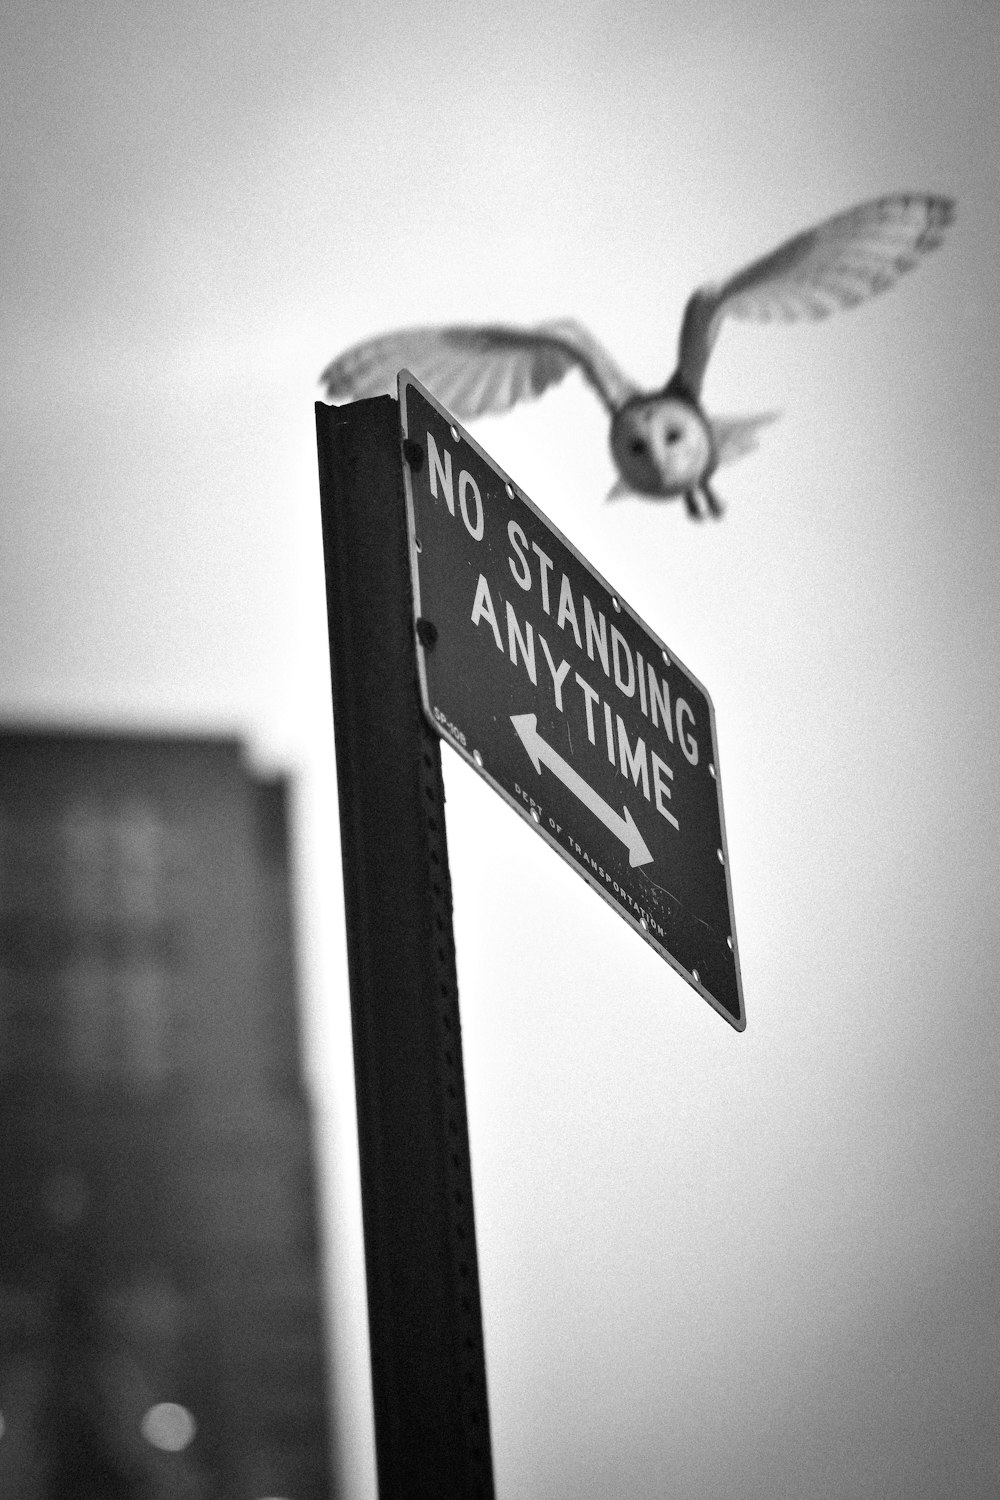 soaring owl over no standing anytime signage